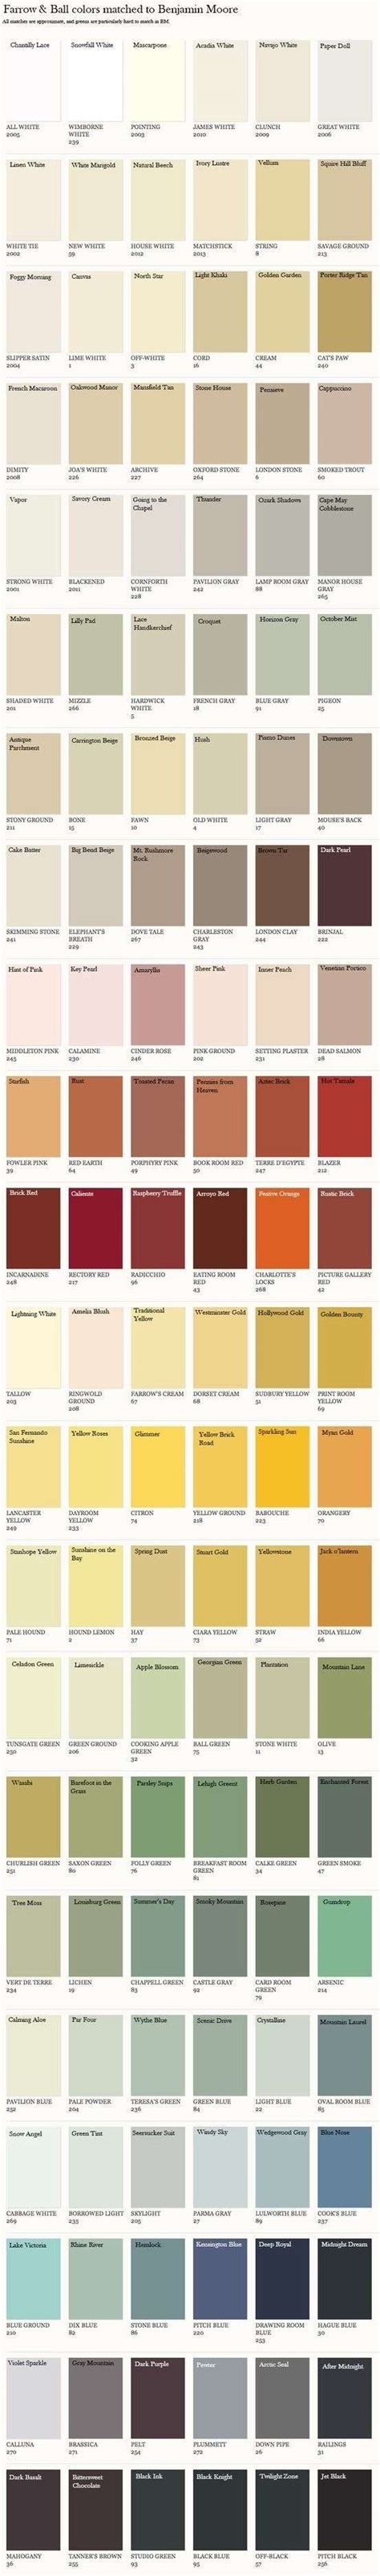 Farrow Ball Paint Colors Matched Benjamin Moore Lentine Marine